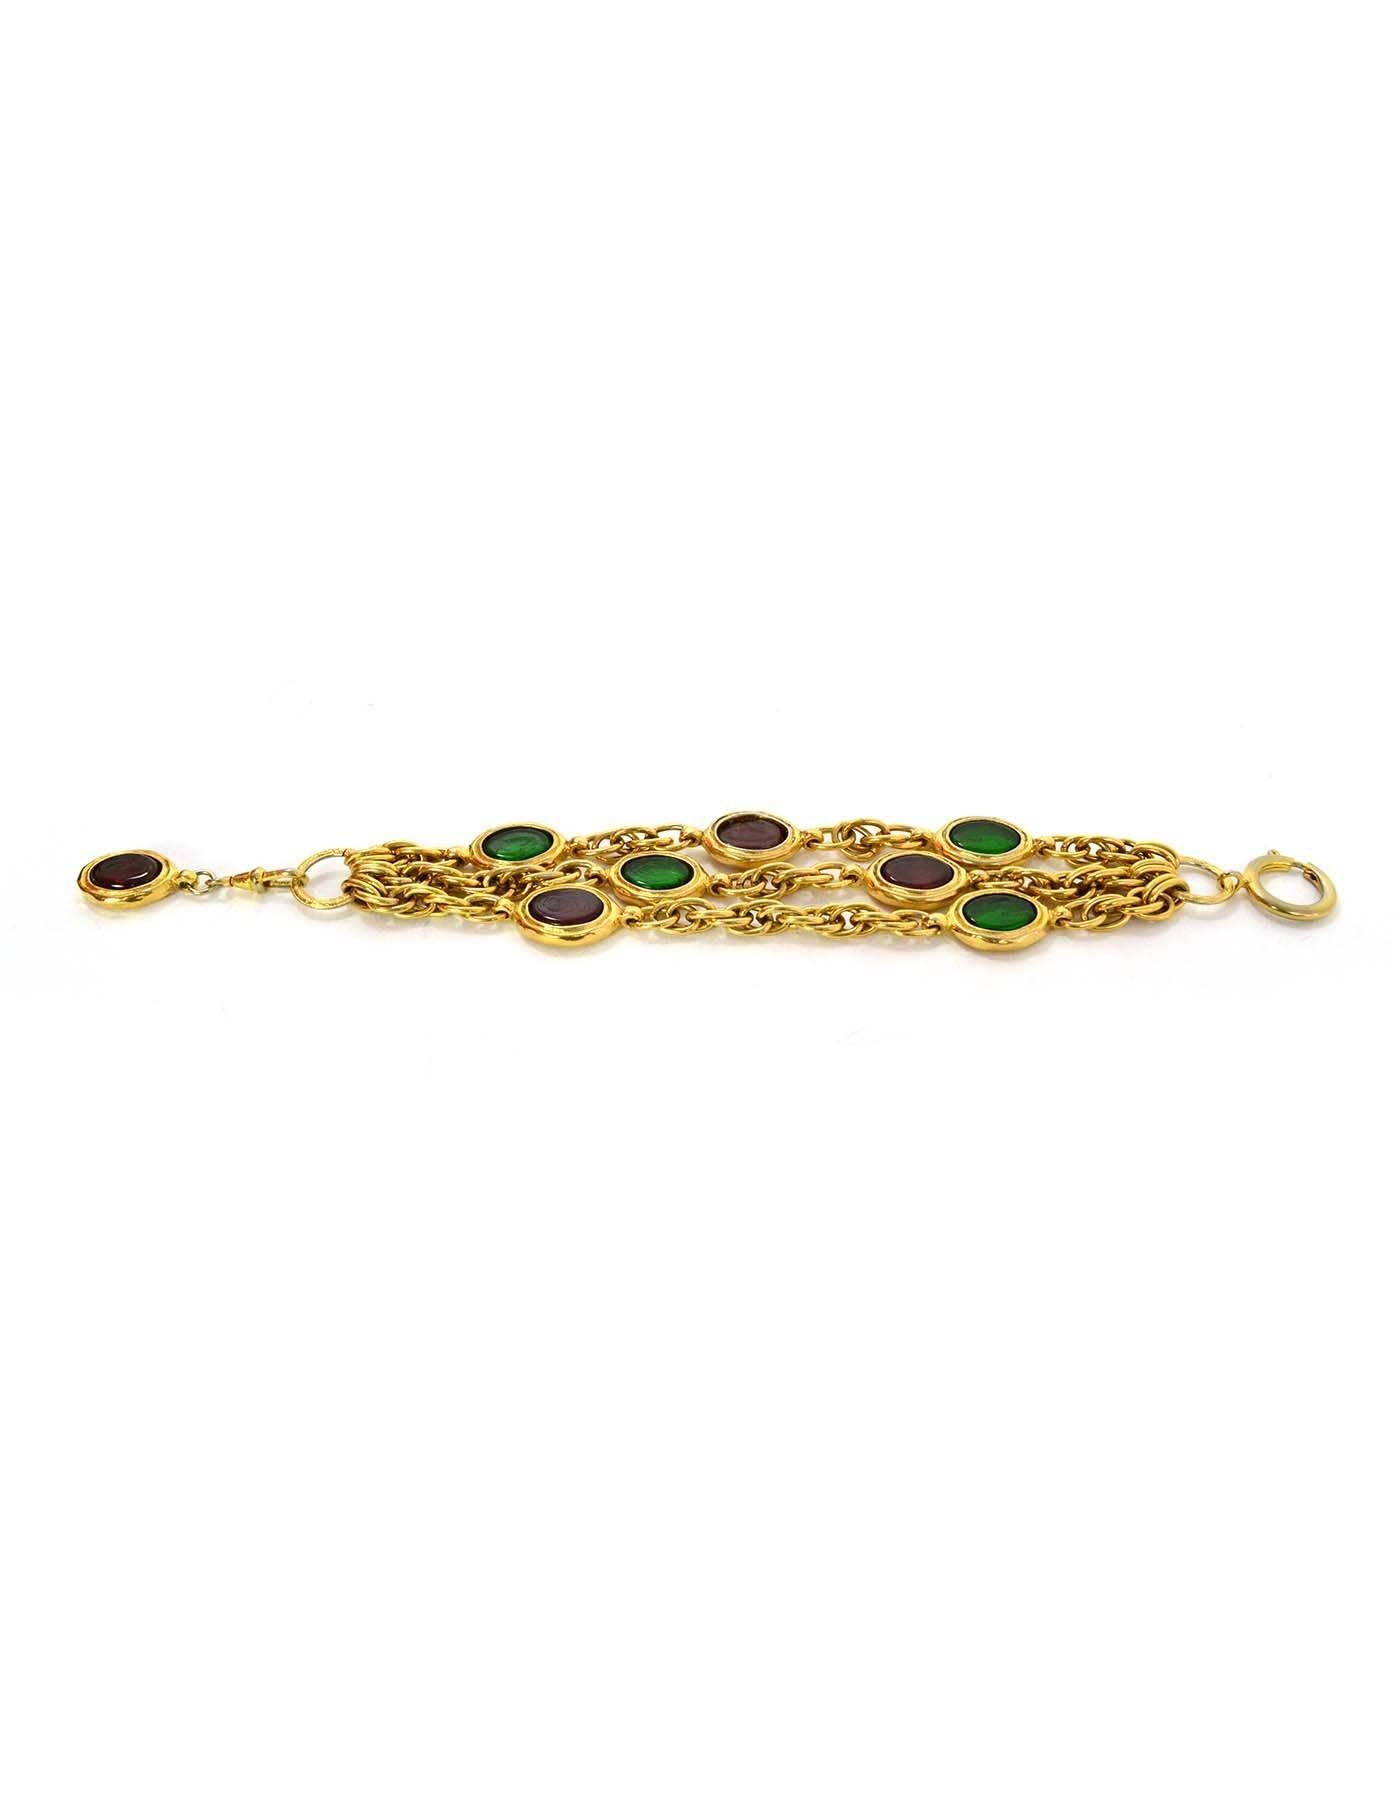 Chanel Gripoix & Goldtone Multi-Strand Bracelet

Made In: France
Year of Production: 1970s
Color: Red, green, and goldtone
Materials: Metal and gripoix
Closure: Jump ring closure
Stamp: Chanel CC Made in France
Overall Condition: Excellent